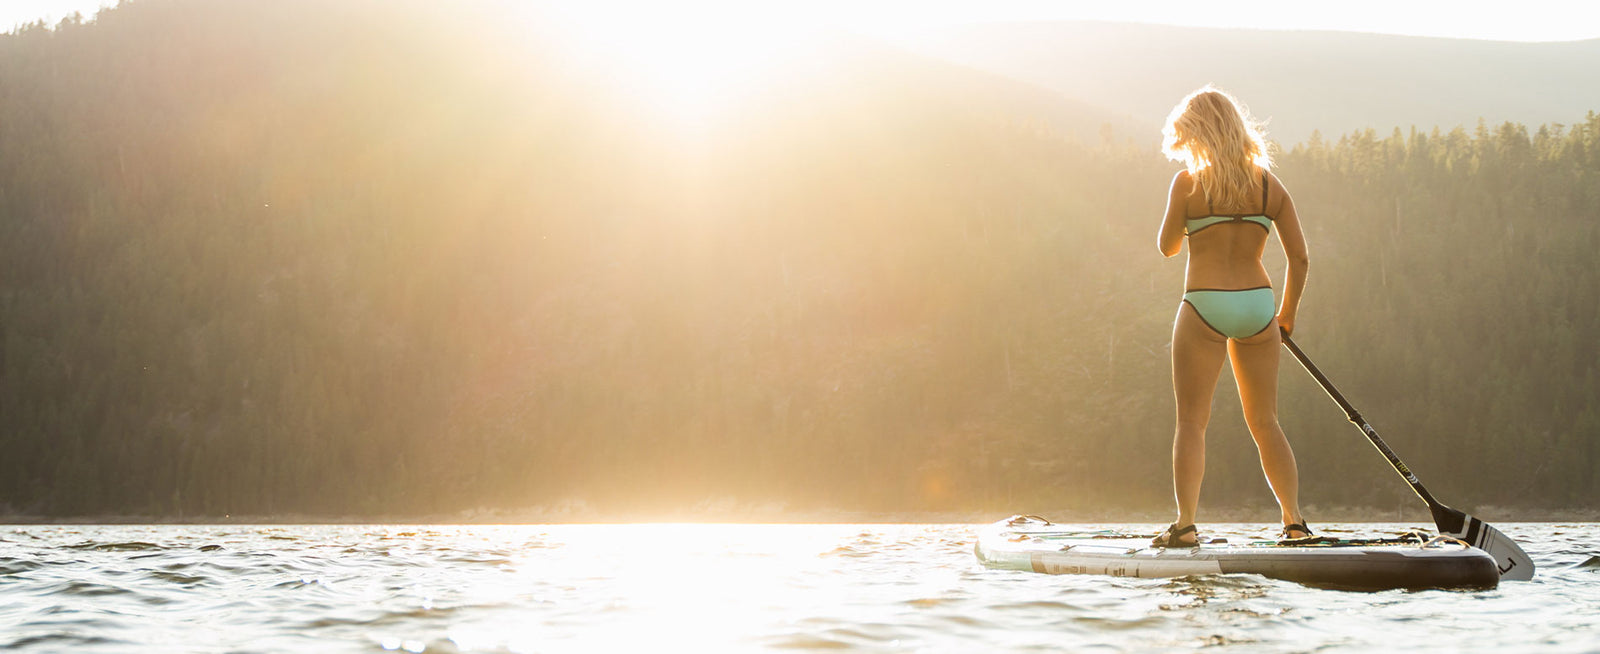 The Top 6 Must Have SUP Boarding Accessories For Next Summer